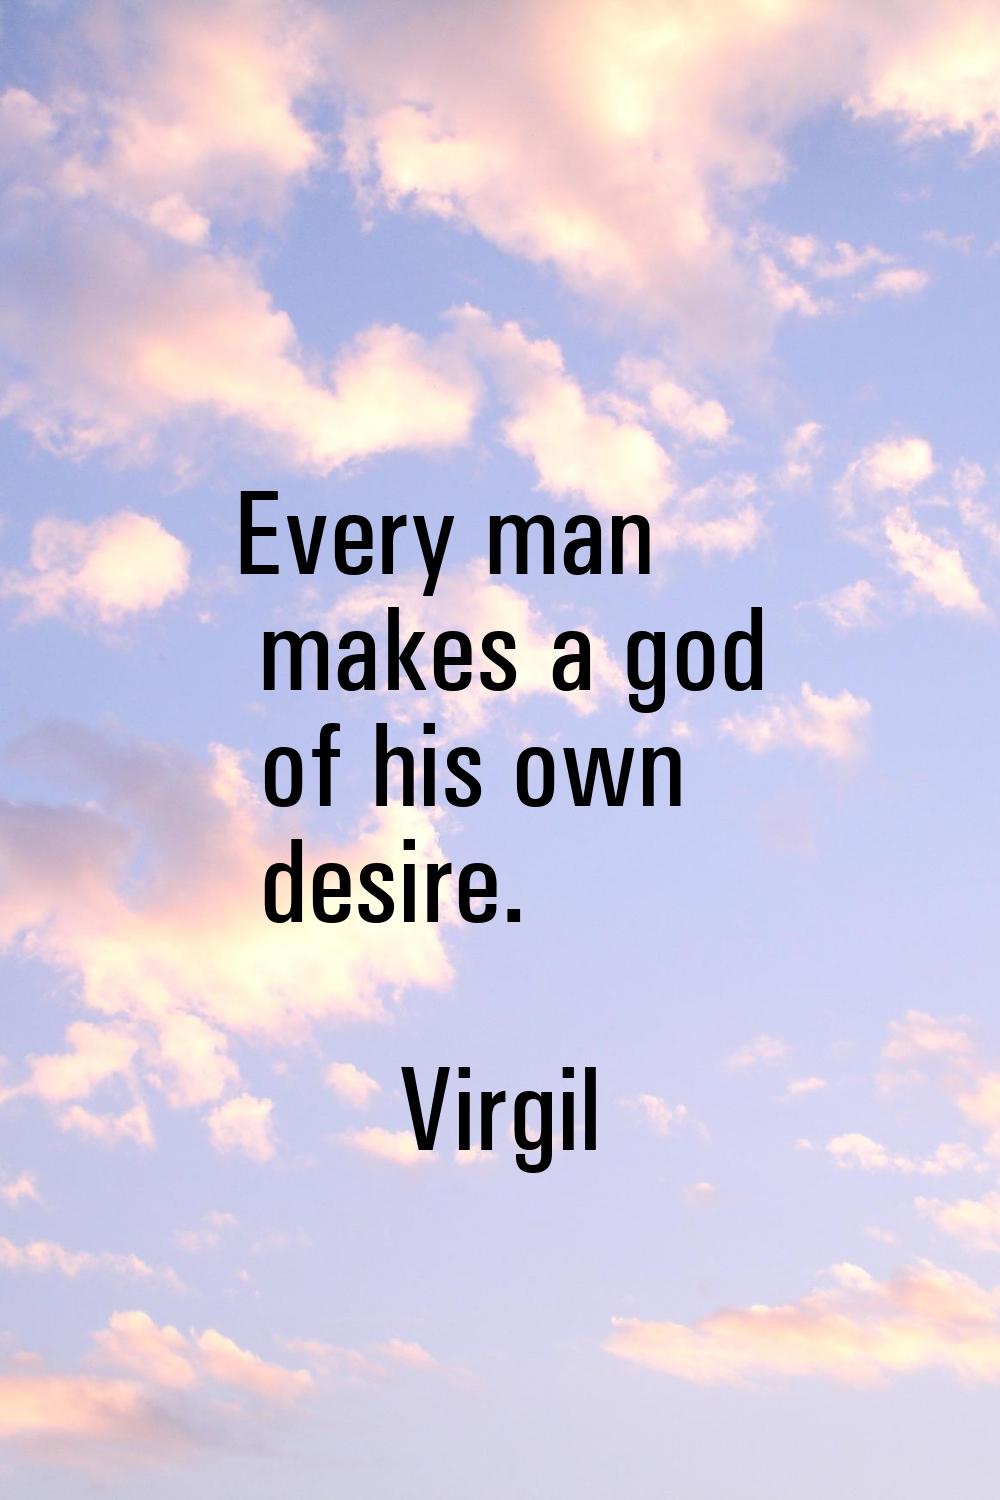 Every man makes a god of his own desire.